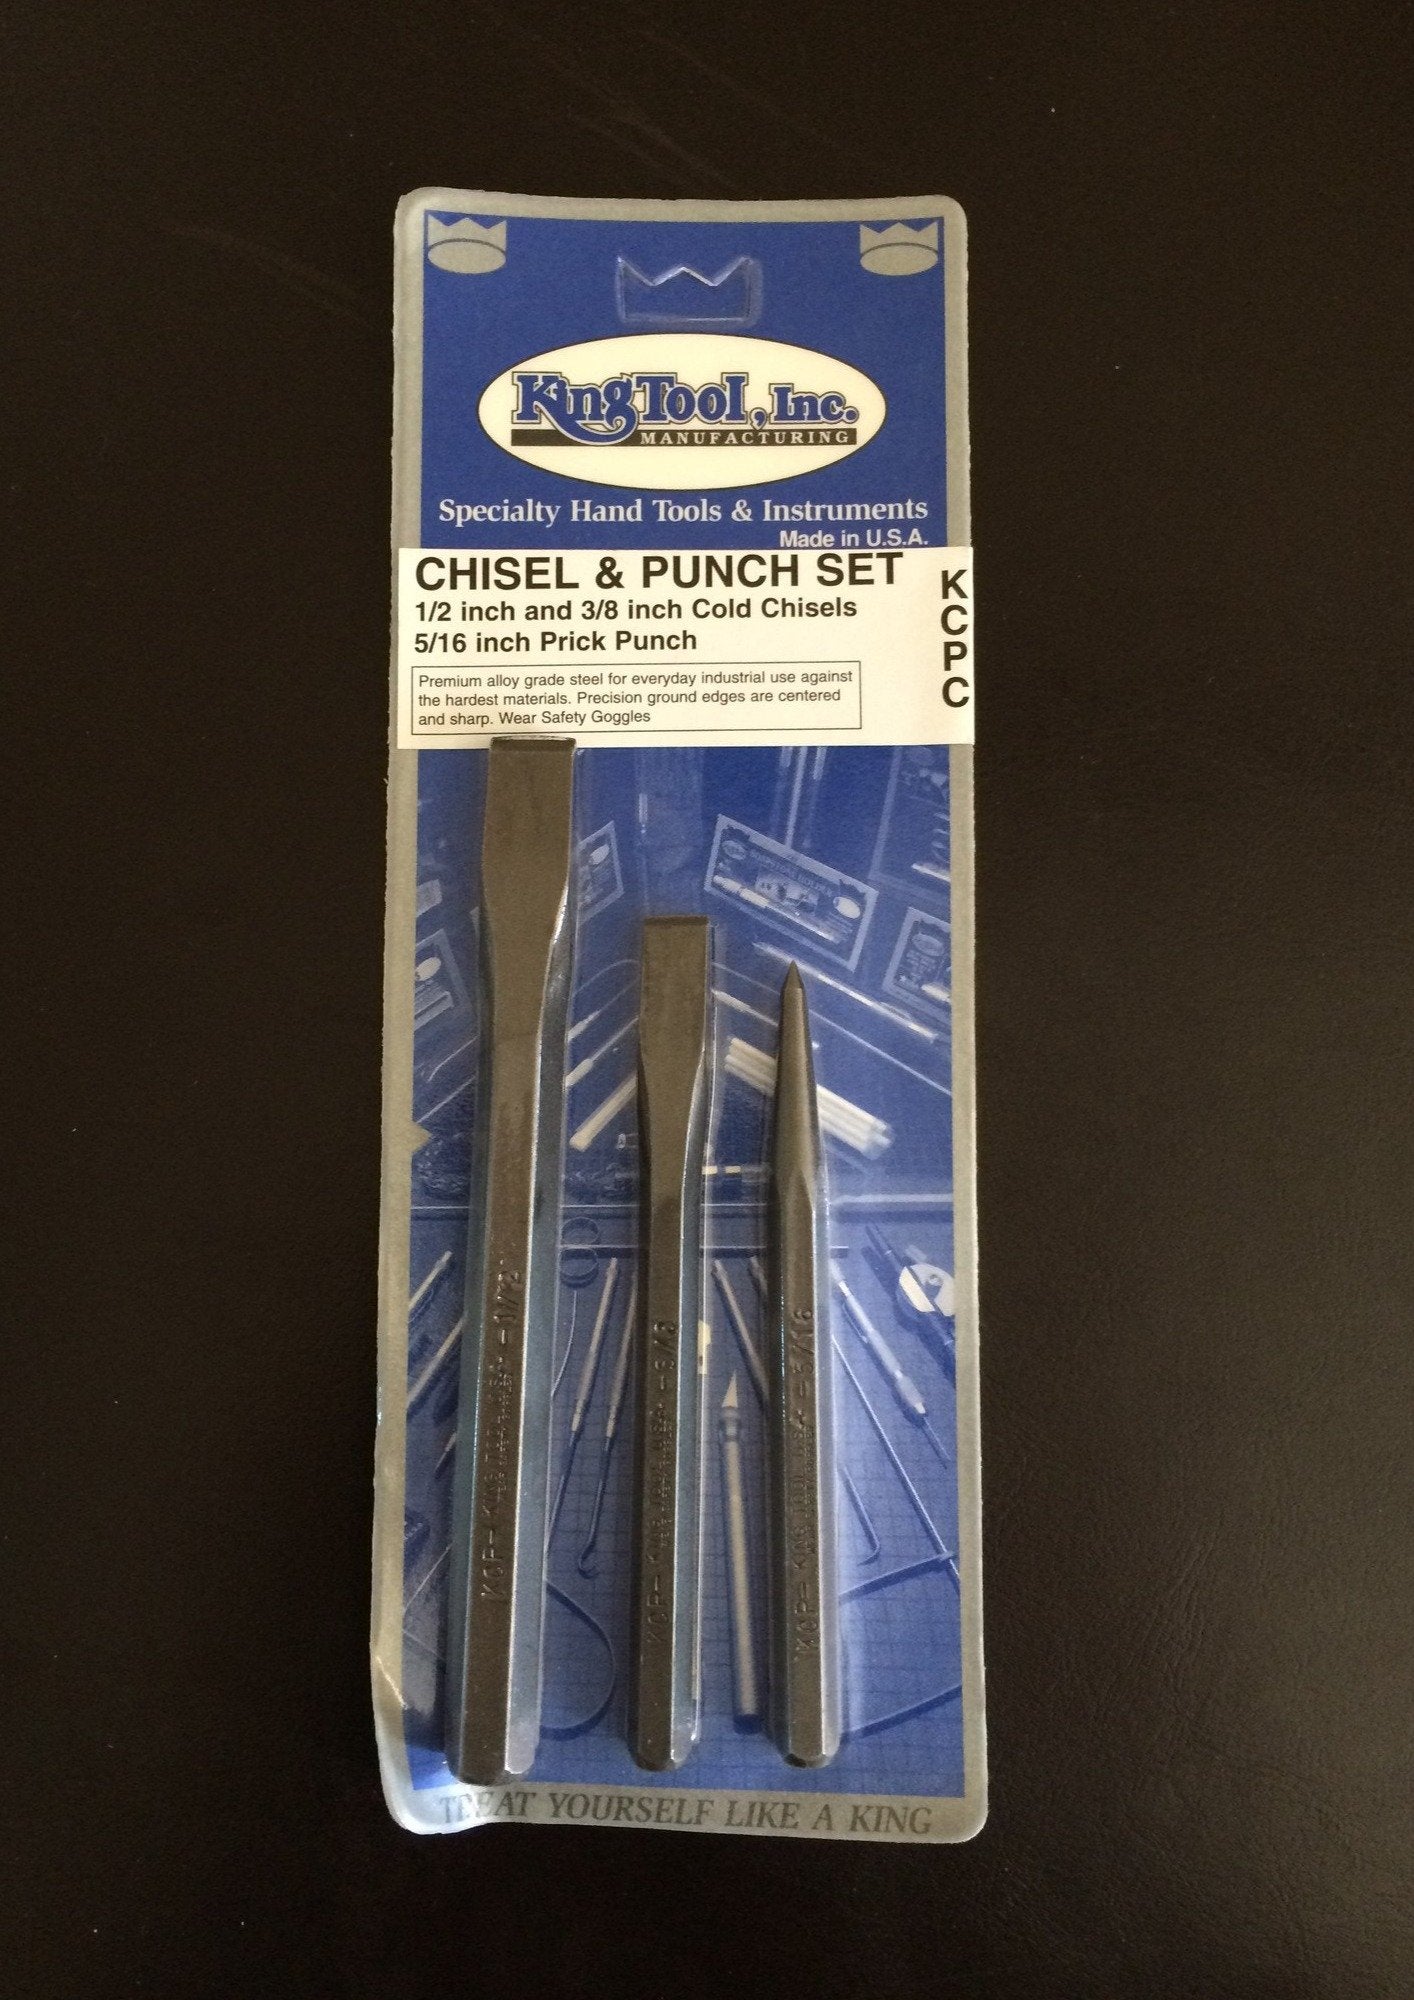 CHISEL AND PUNCH SET